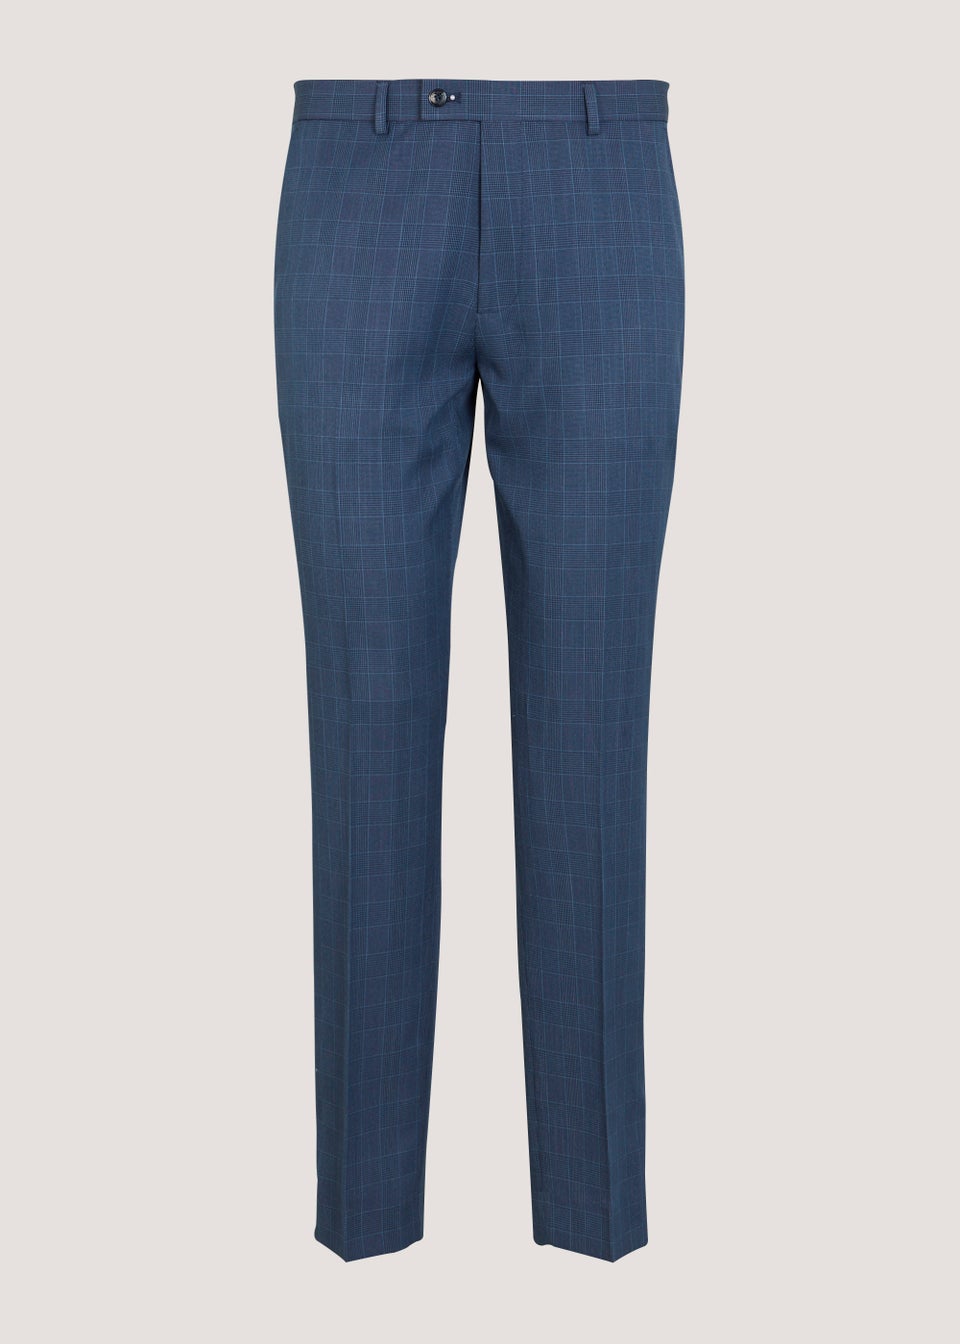 Taylor & Wright Hemsworth Blue Check Slim Fit Suit Trousers